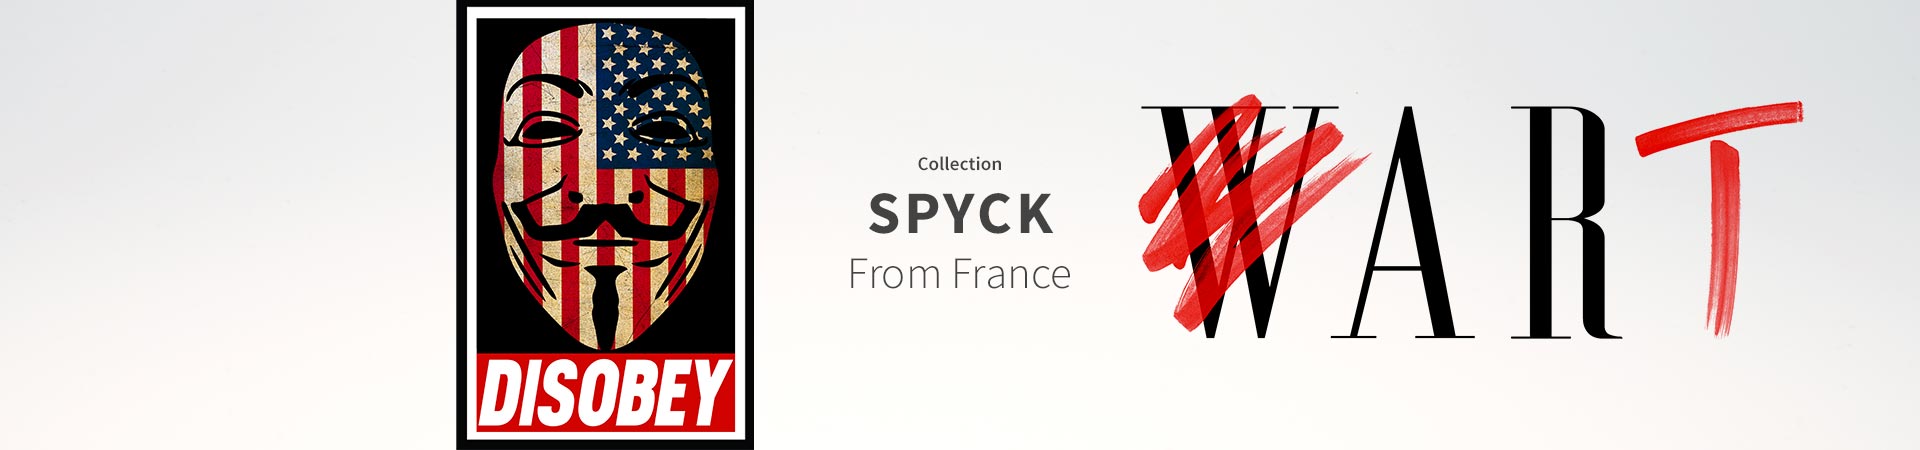 Collection Spyck